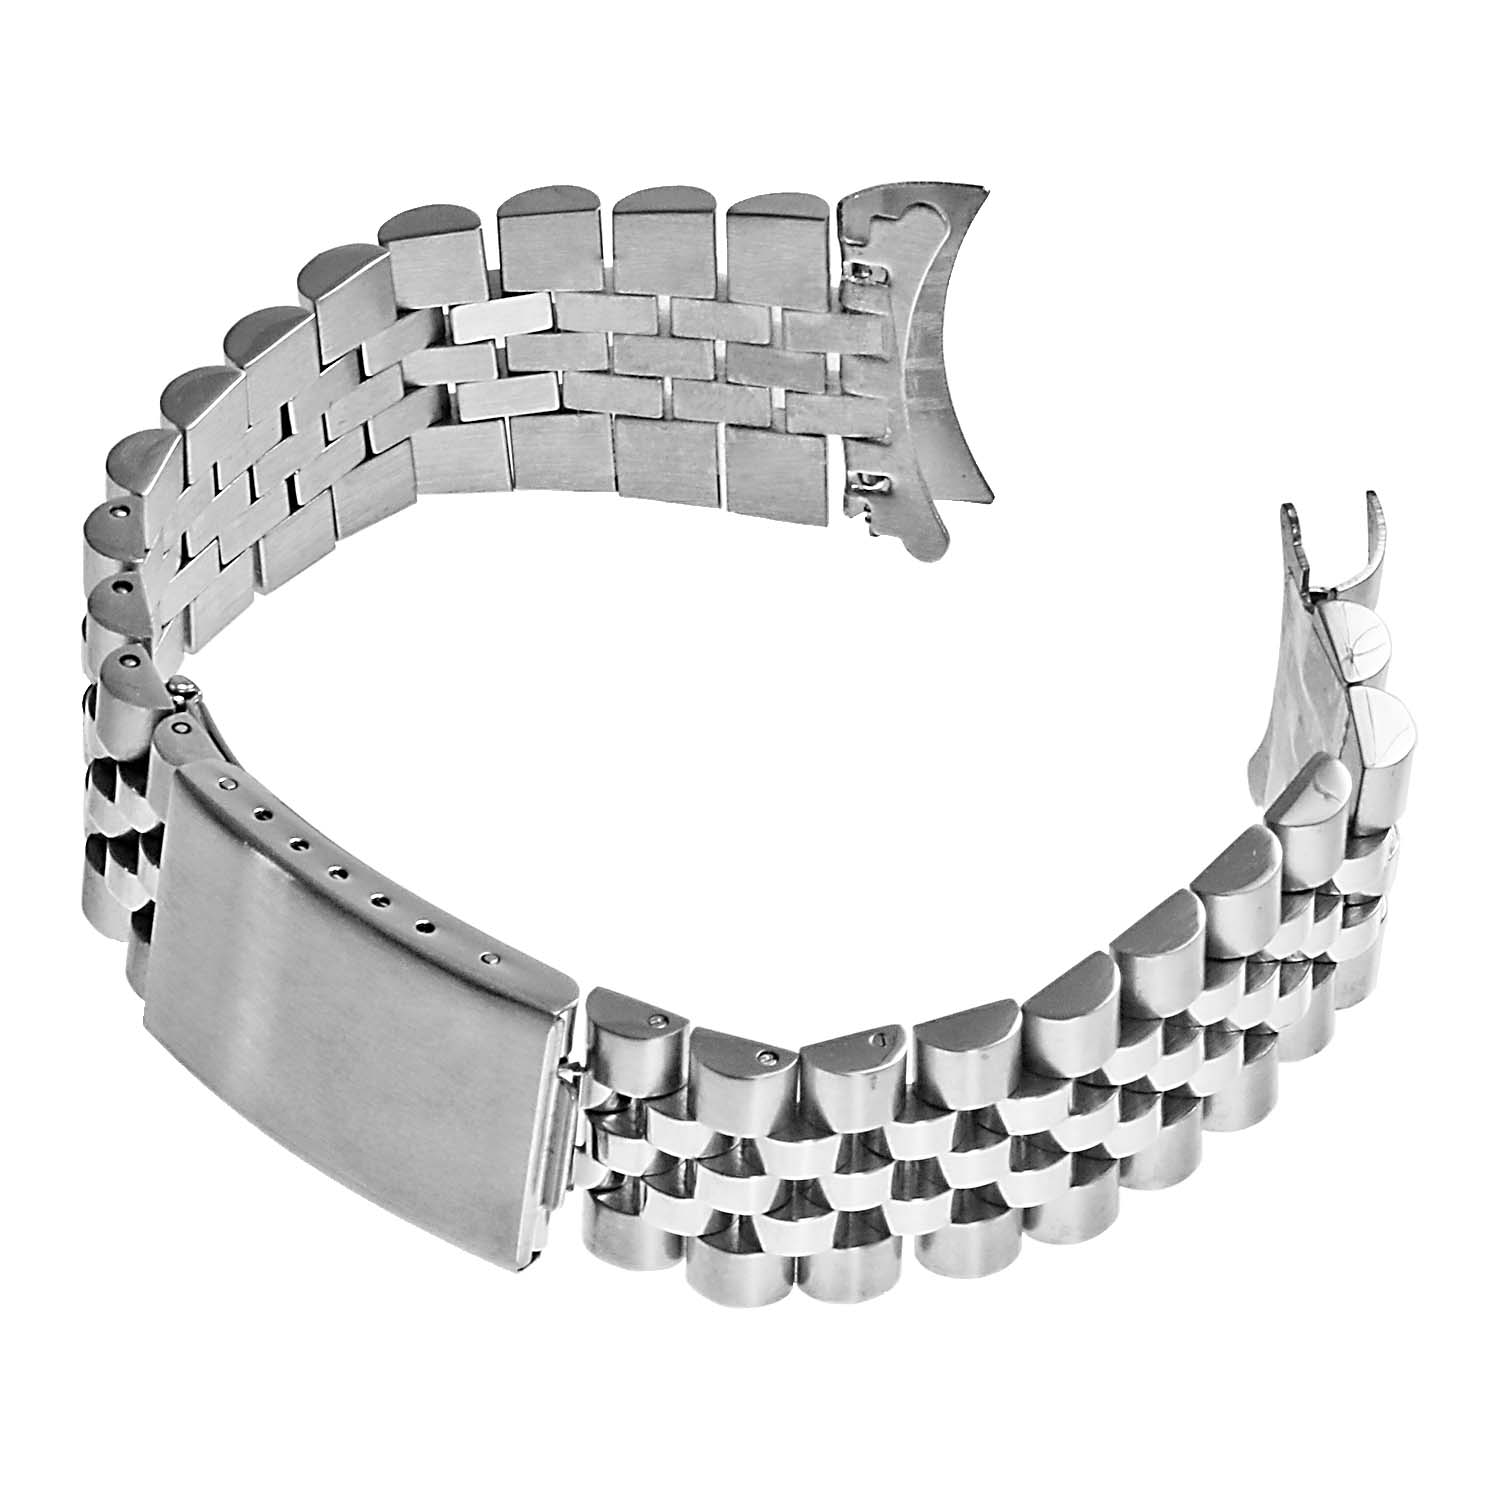 18mm Tapered Gay Frères Stretch Rivet Bracelet 5.6 inch for $4,900 for sale  from a Seller on Chrono24